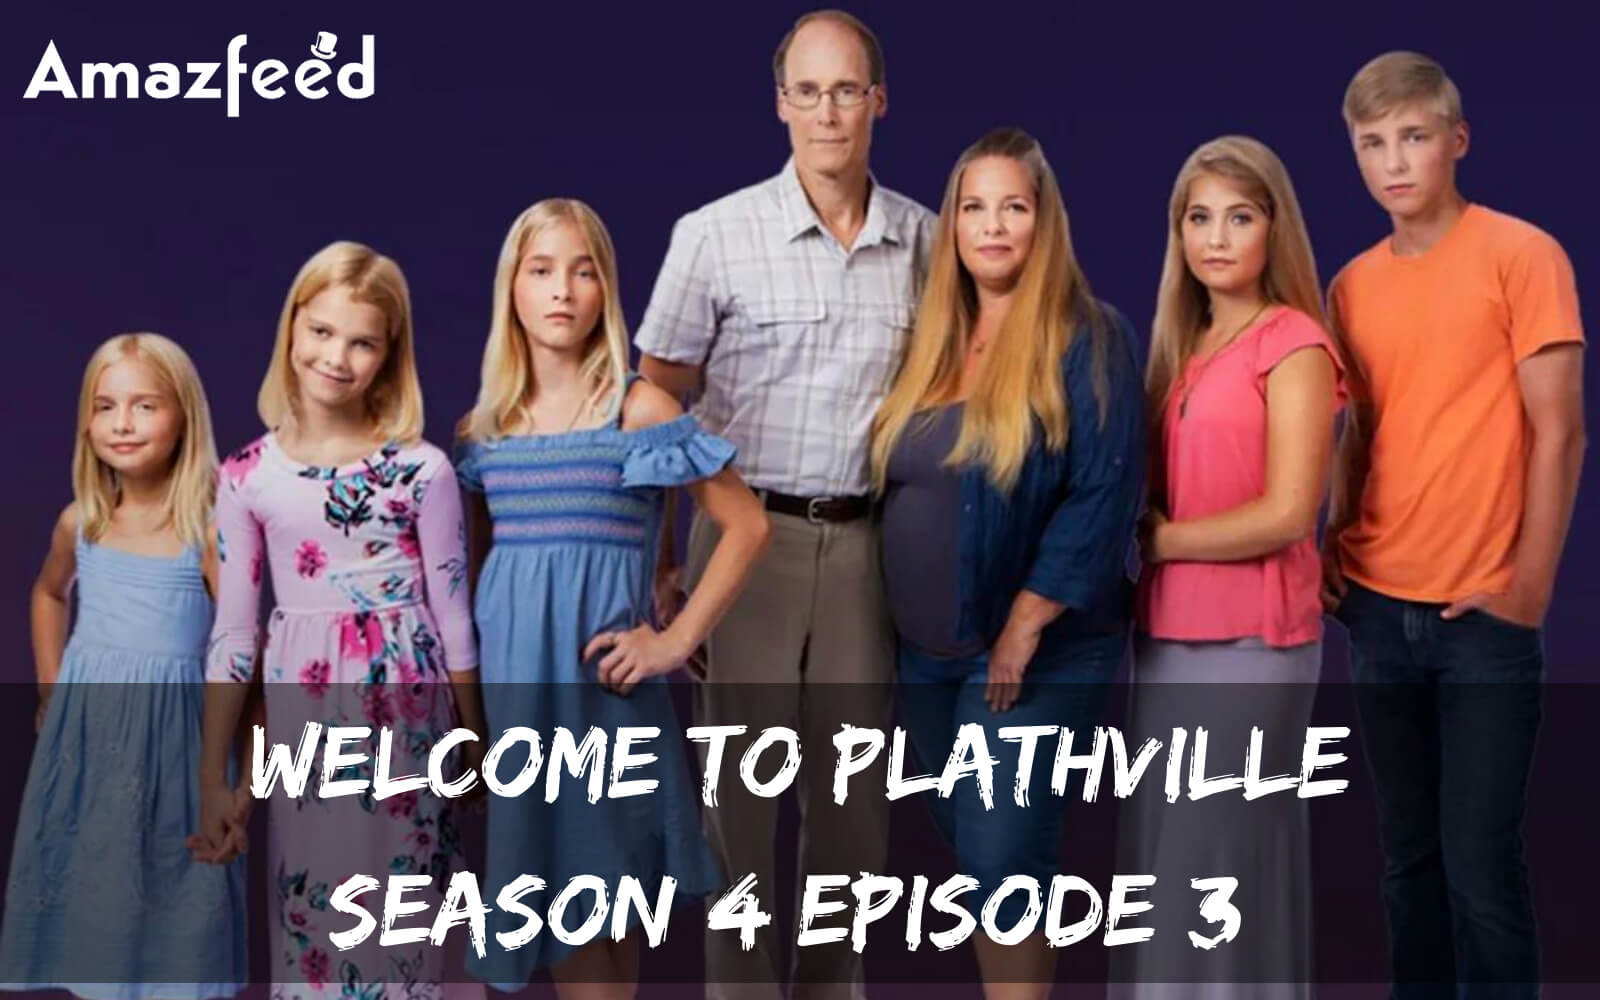 Welcome to Plathville season 4 Episode 3 release date